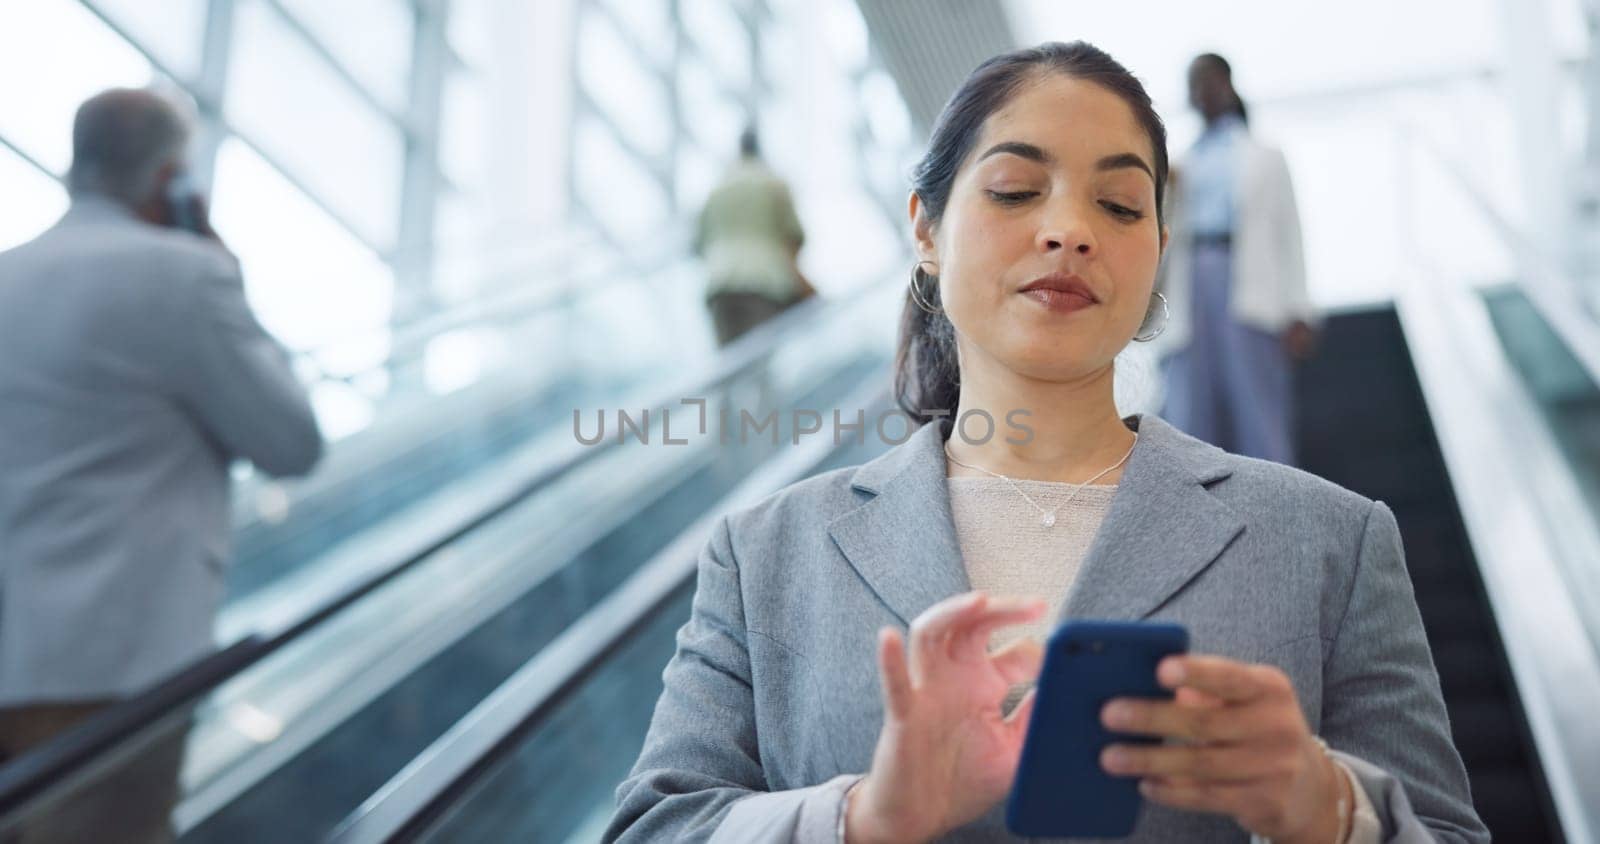 Business, escalator and travel with woman, cellphone and social media with accountant, employee and convention. Person, consultant or broker with a smartphone, airport and connection with digital app.